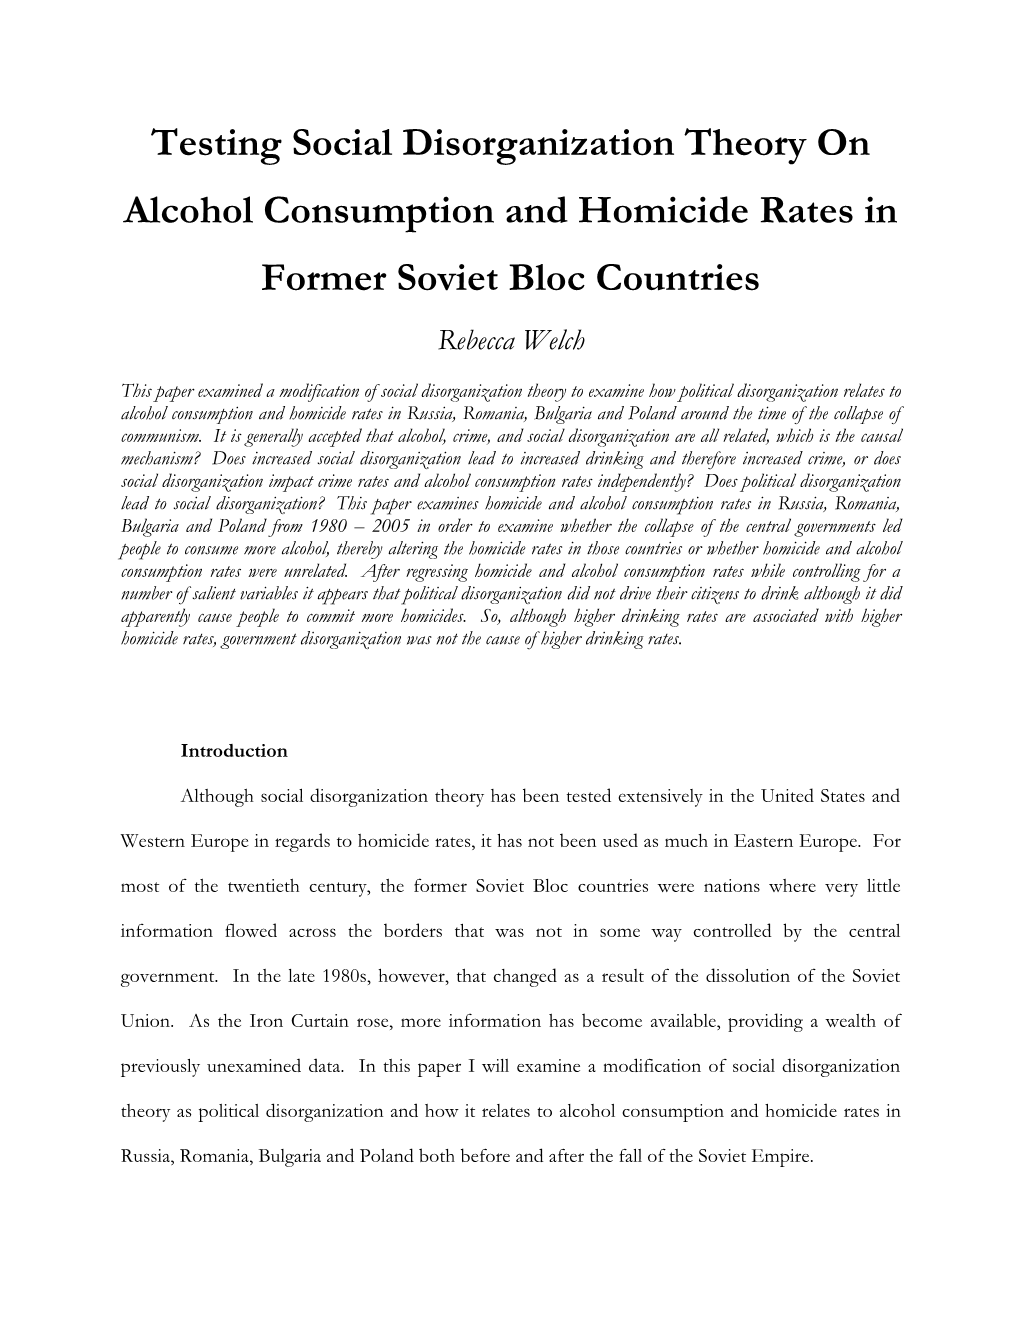 Testing Social Disorganization Theory on Alcohol Consumption and Homicide Rates in Former Soviet Bloc Countries Rebecca Welch